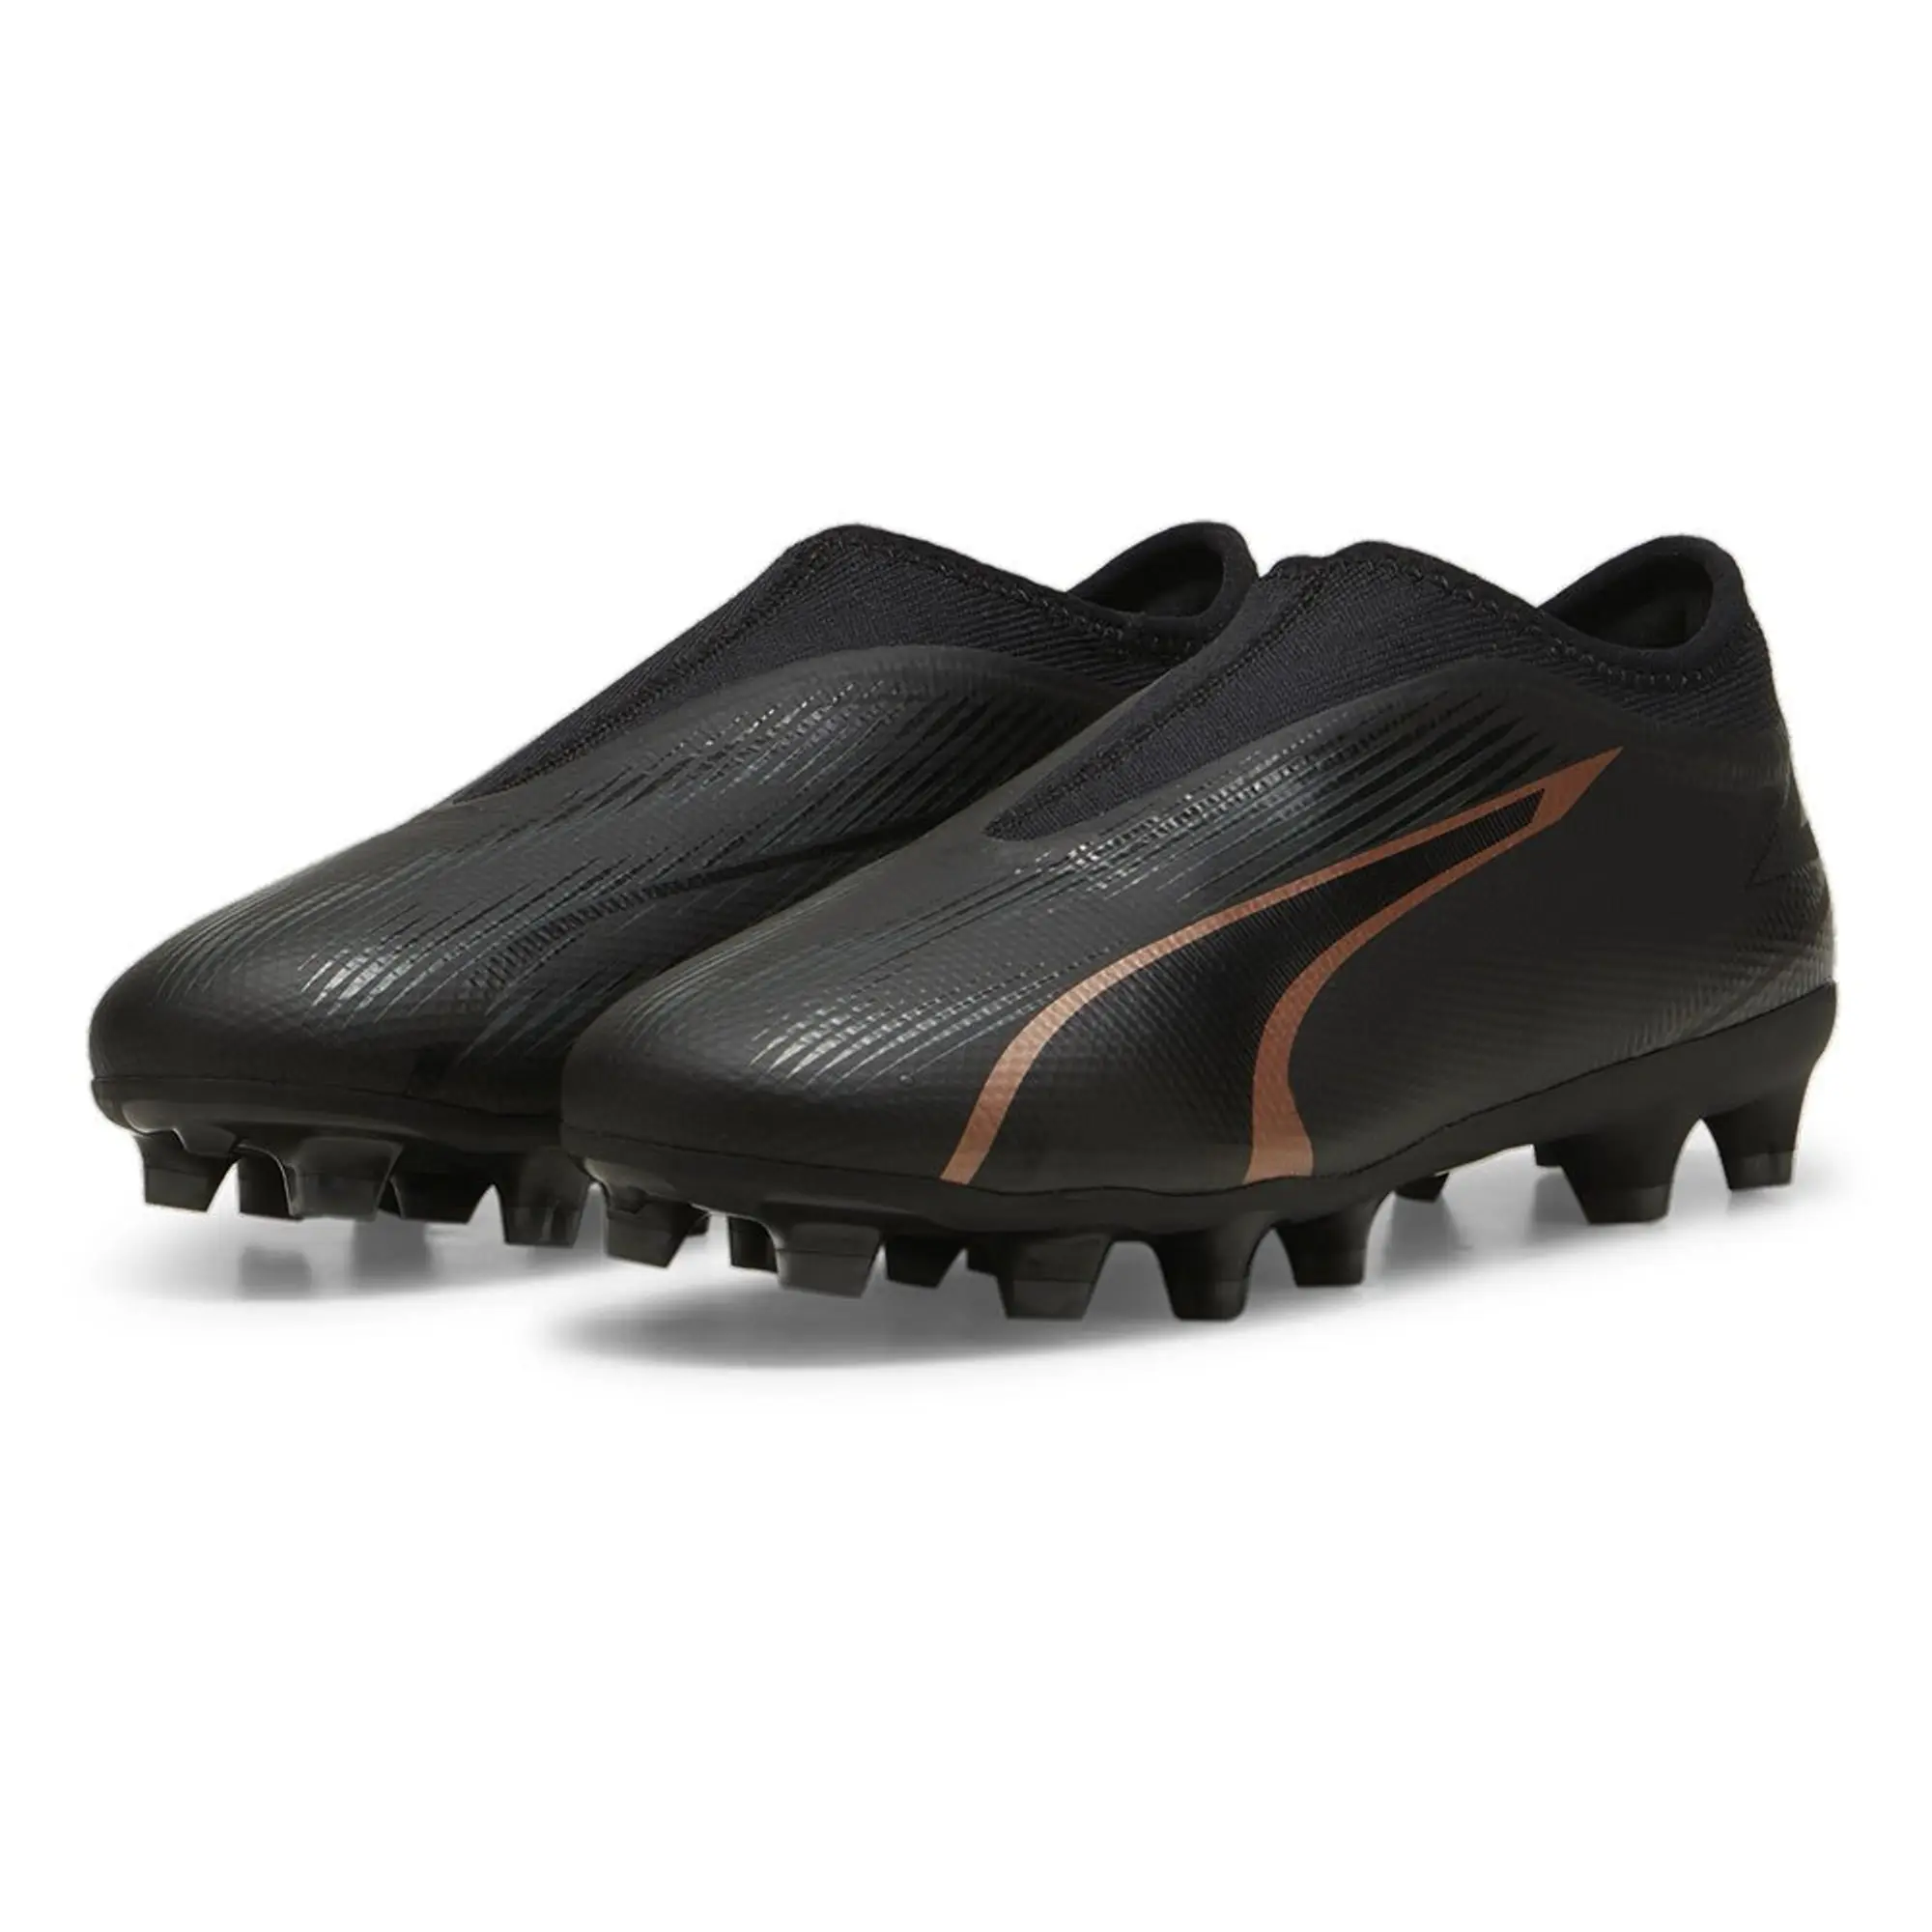 PUMA Ultra Match FG/AG Laceless Youth Football Boots, Black/Copper Rose